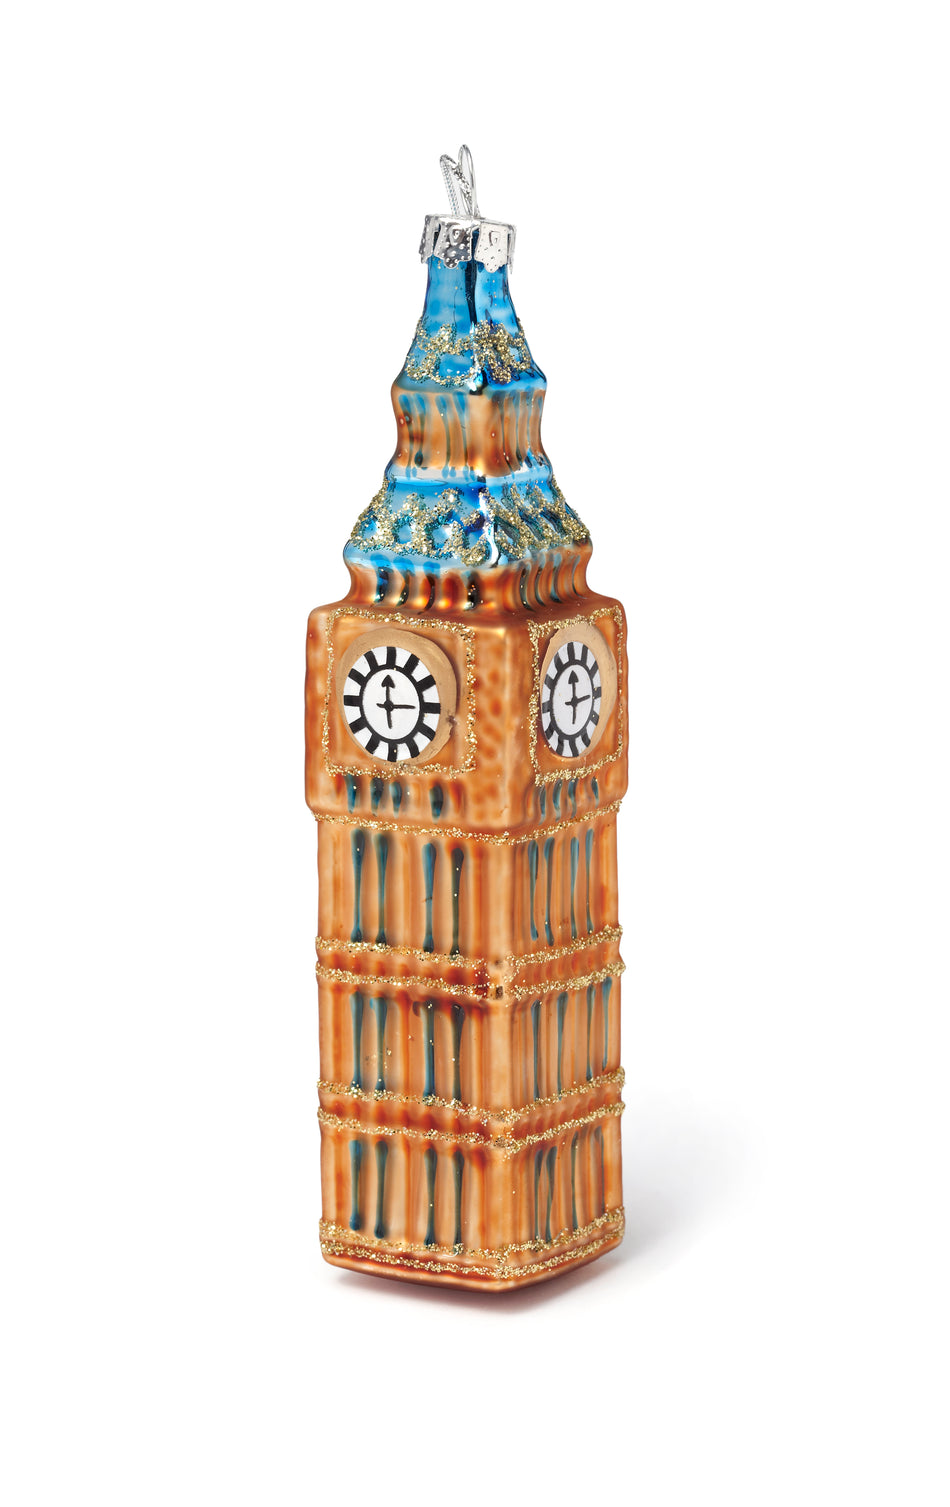 Glass Big Ben Tree Ornament featured image